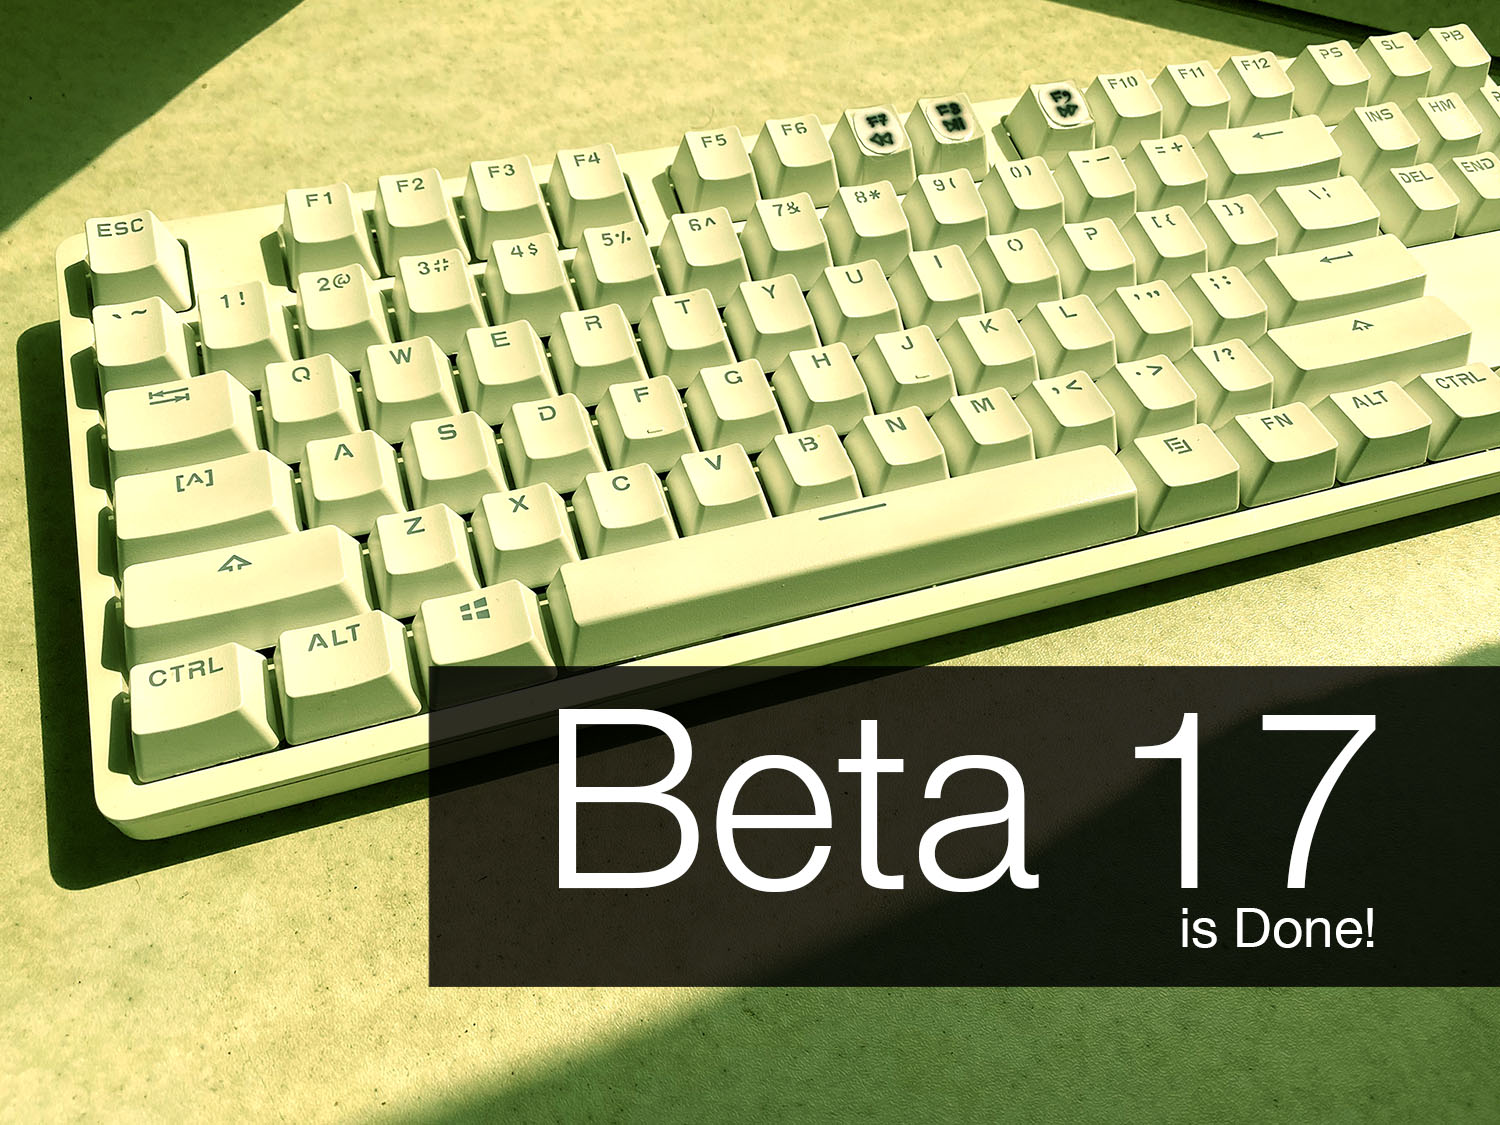 Beta 17 is done!